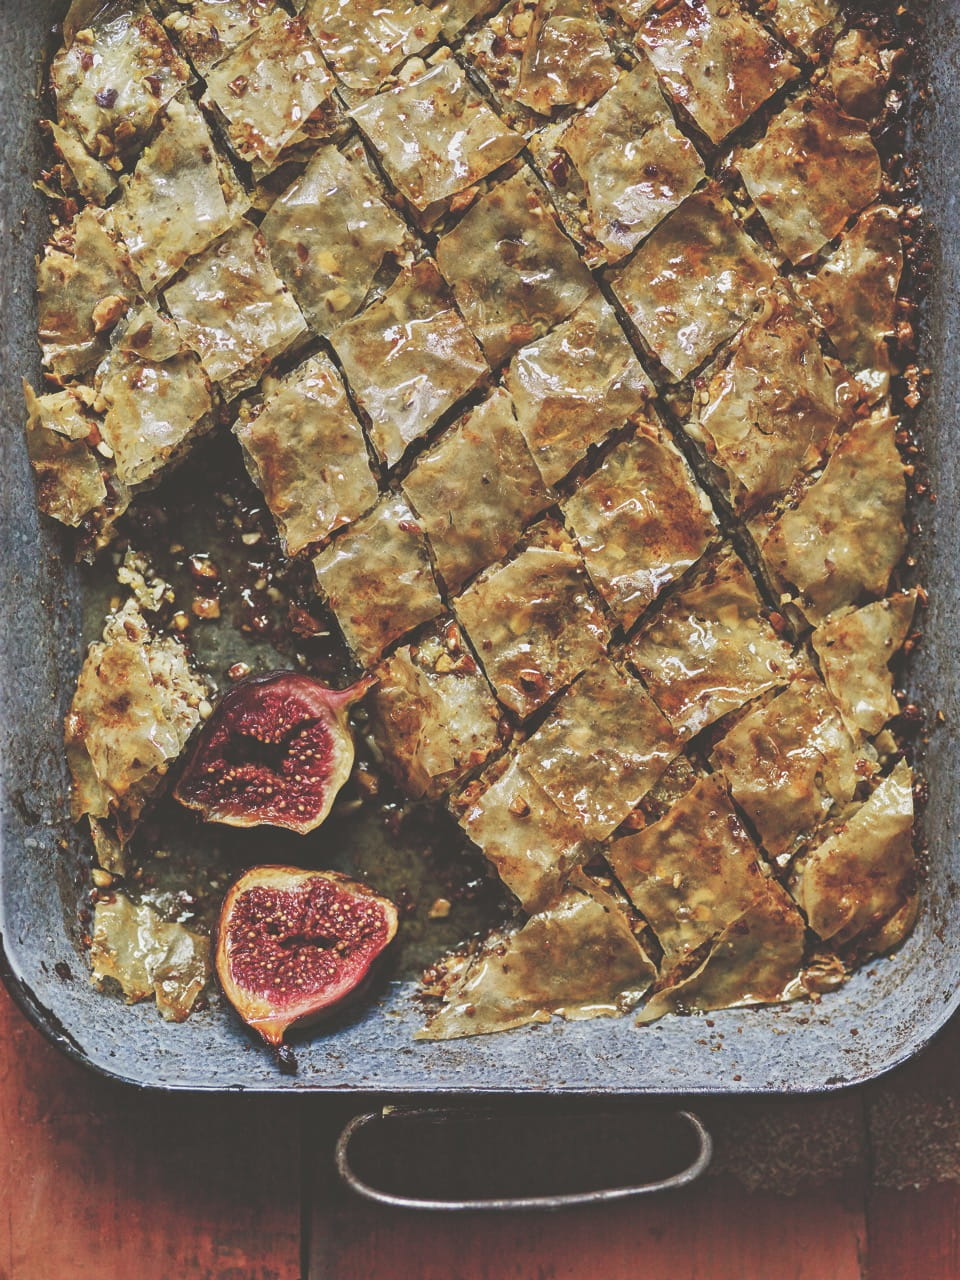 Honey pastries with baked figs